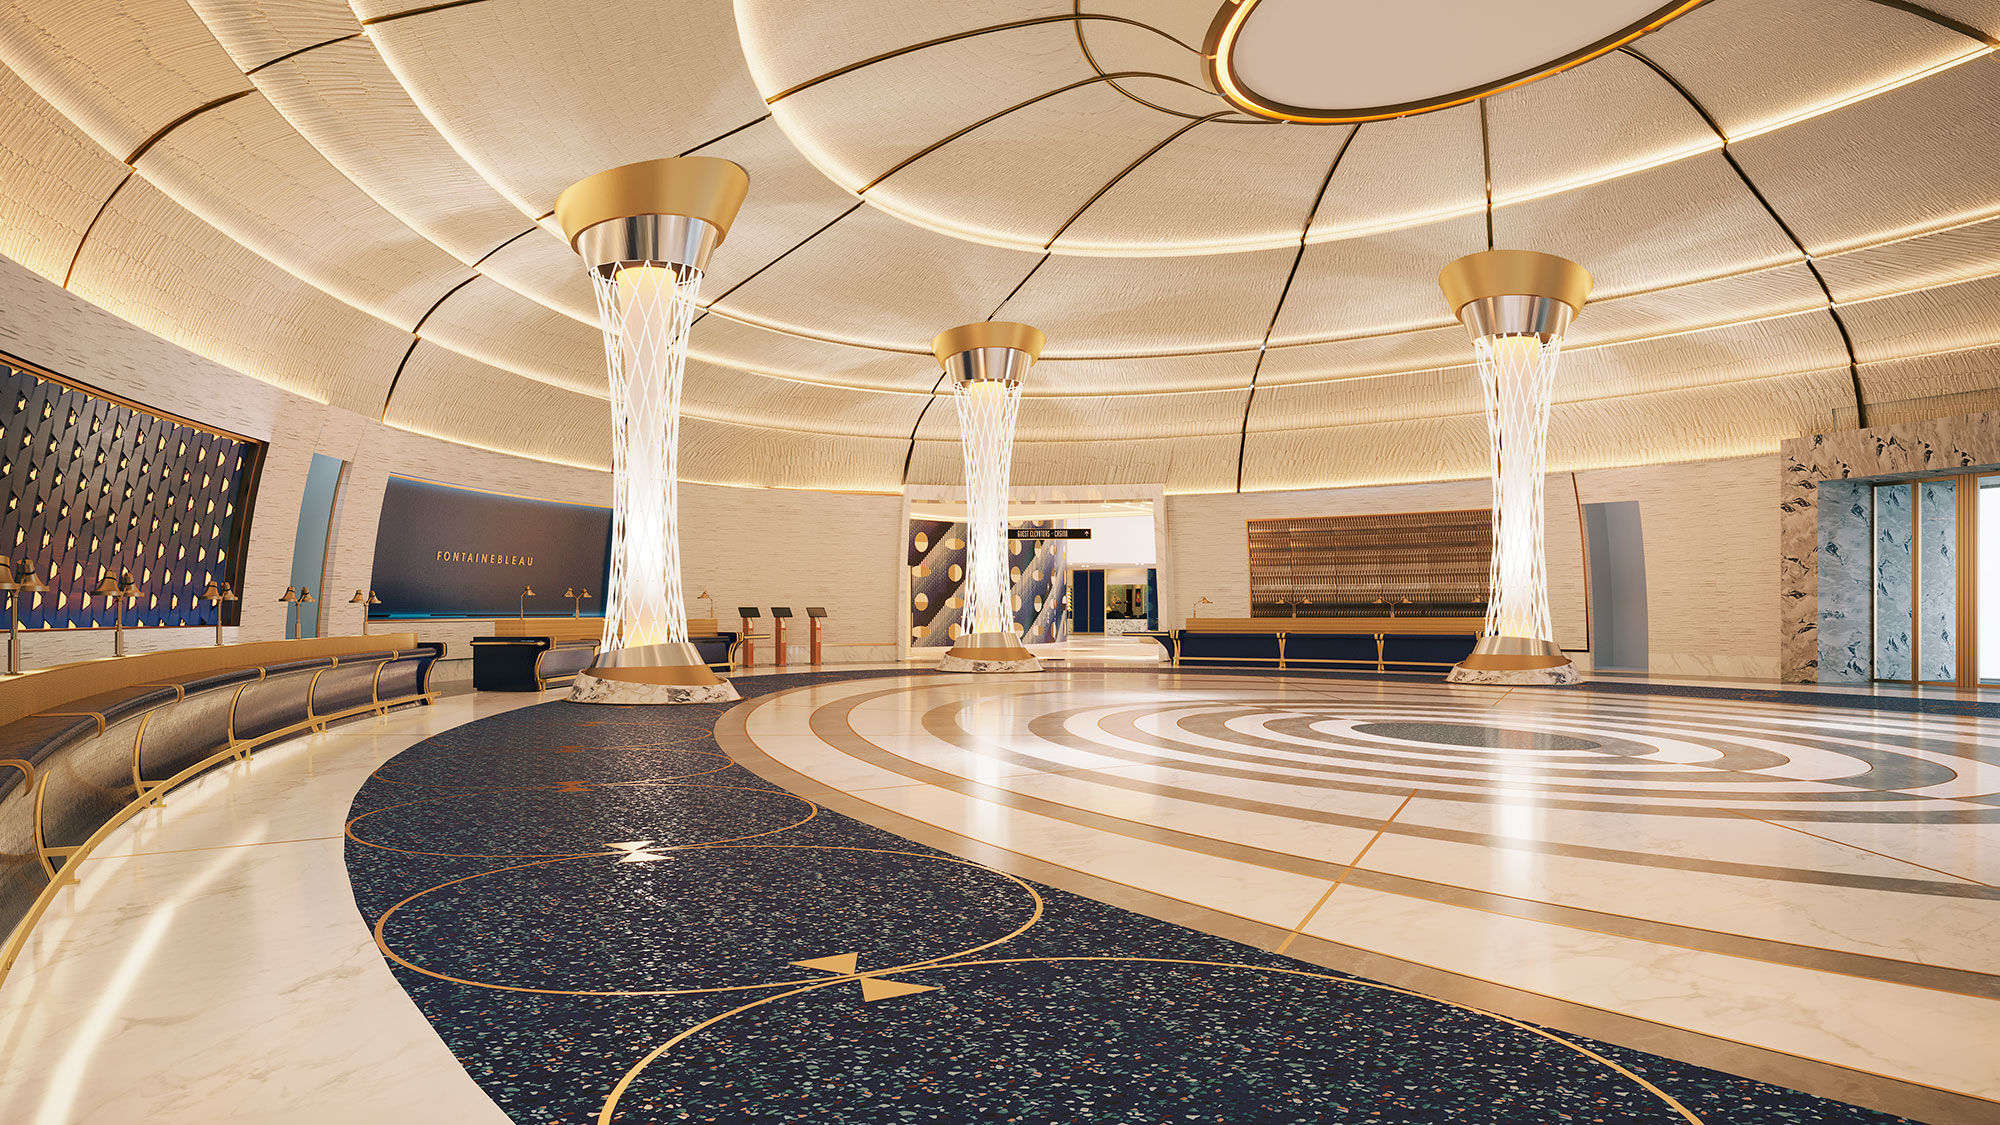 A rendering of the Great Dome reception area.